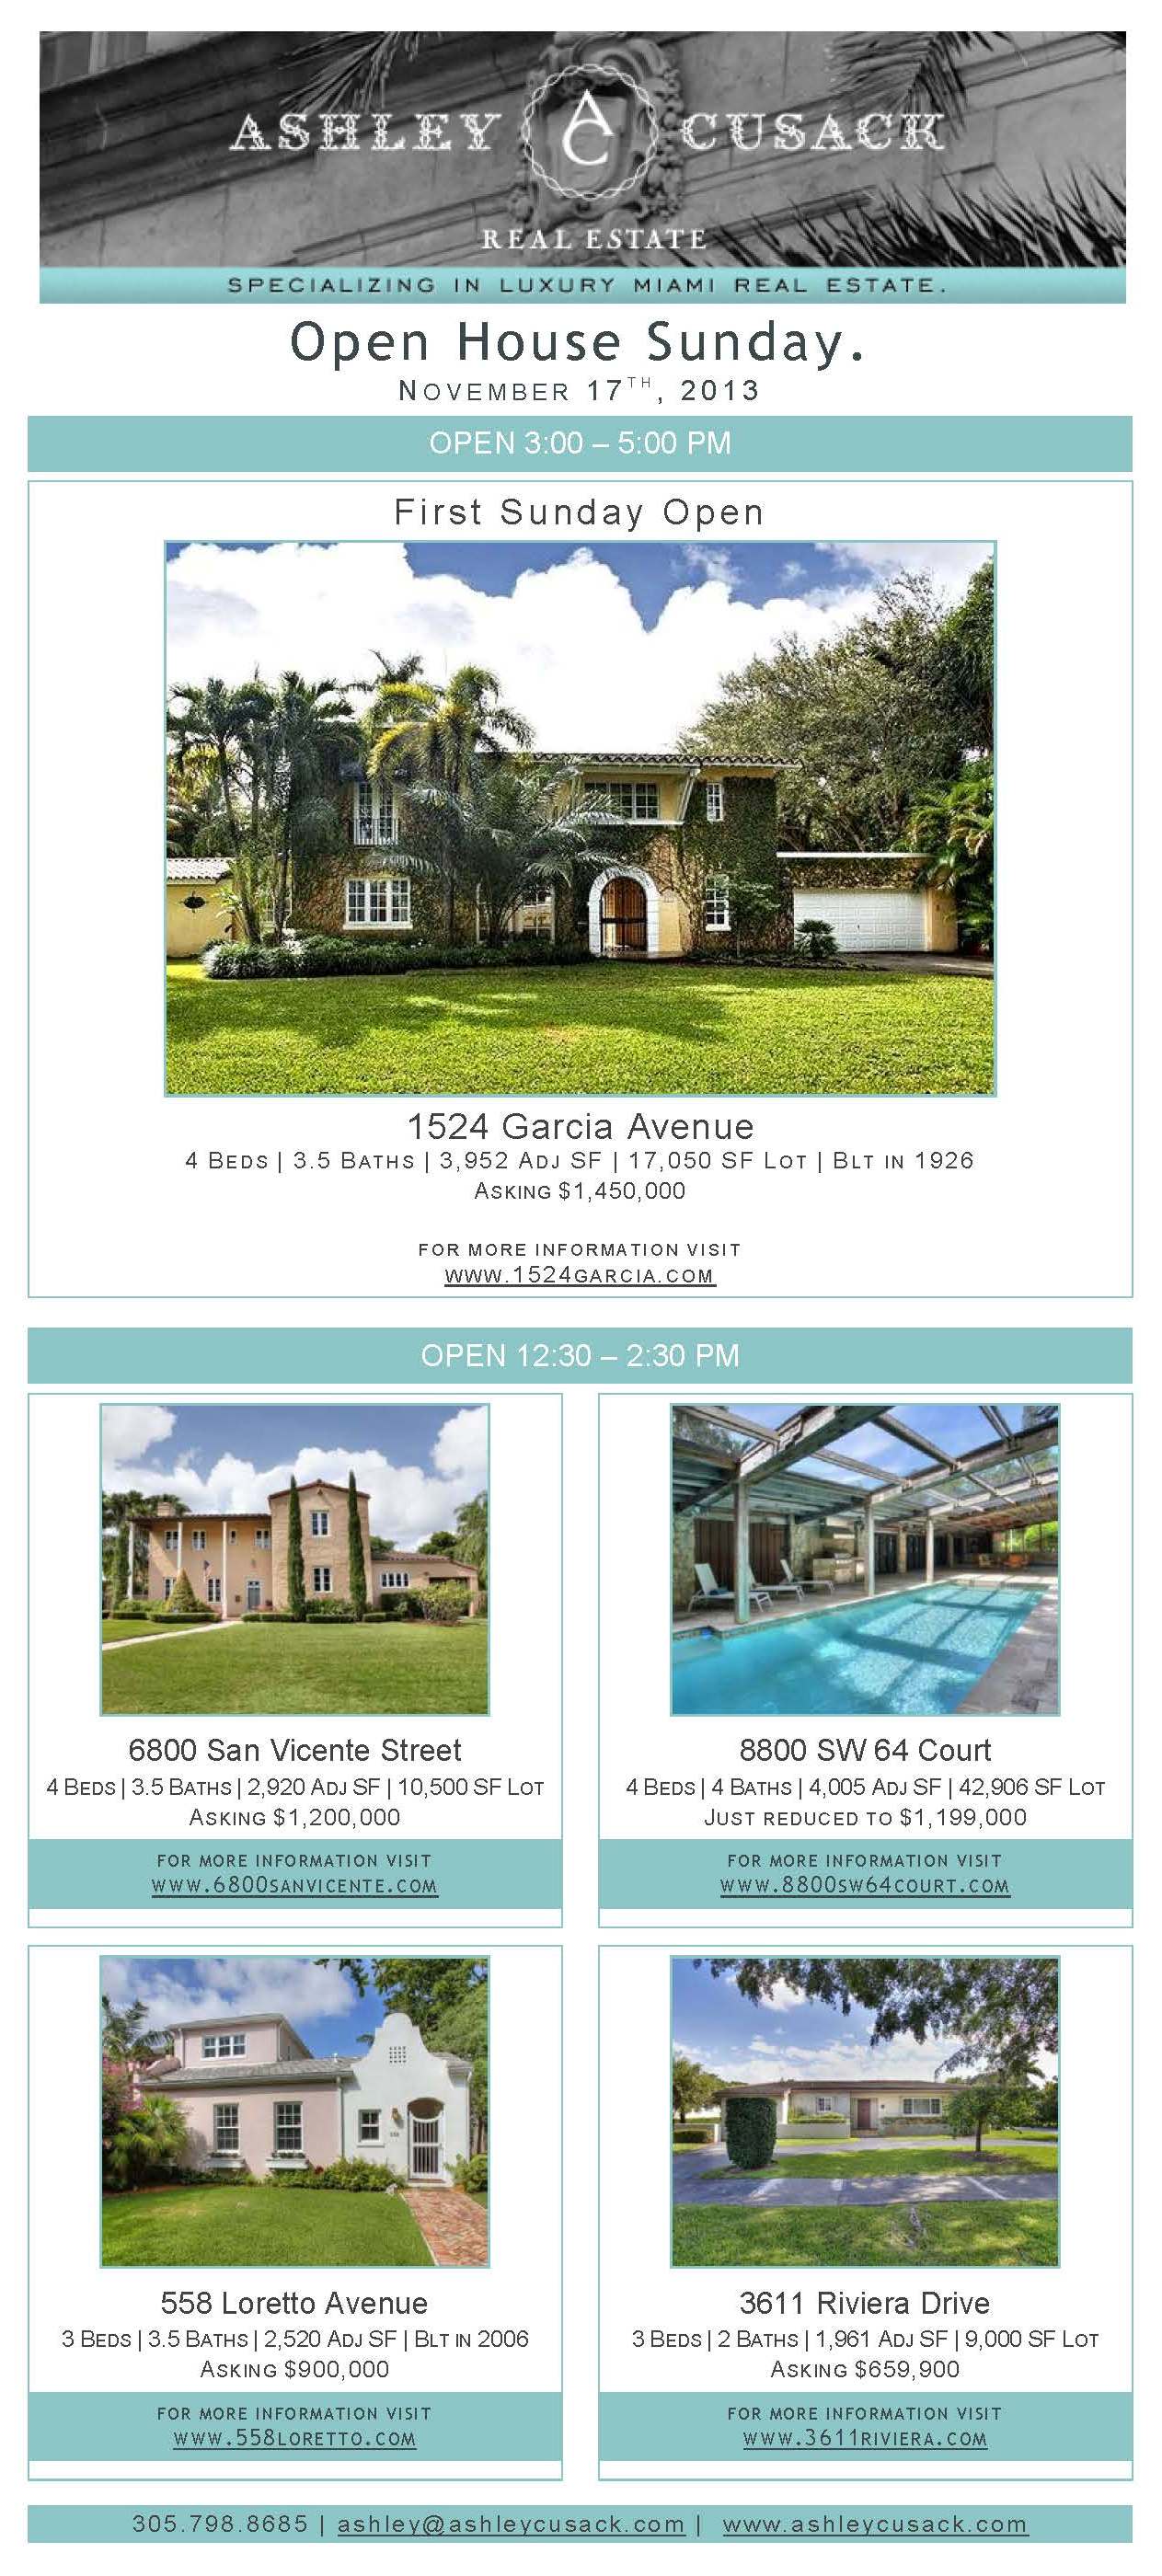 Sunday Open House Real Estate Coral Gables Ashley Cusack